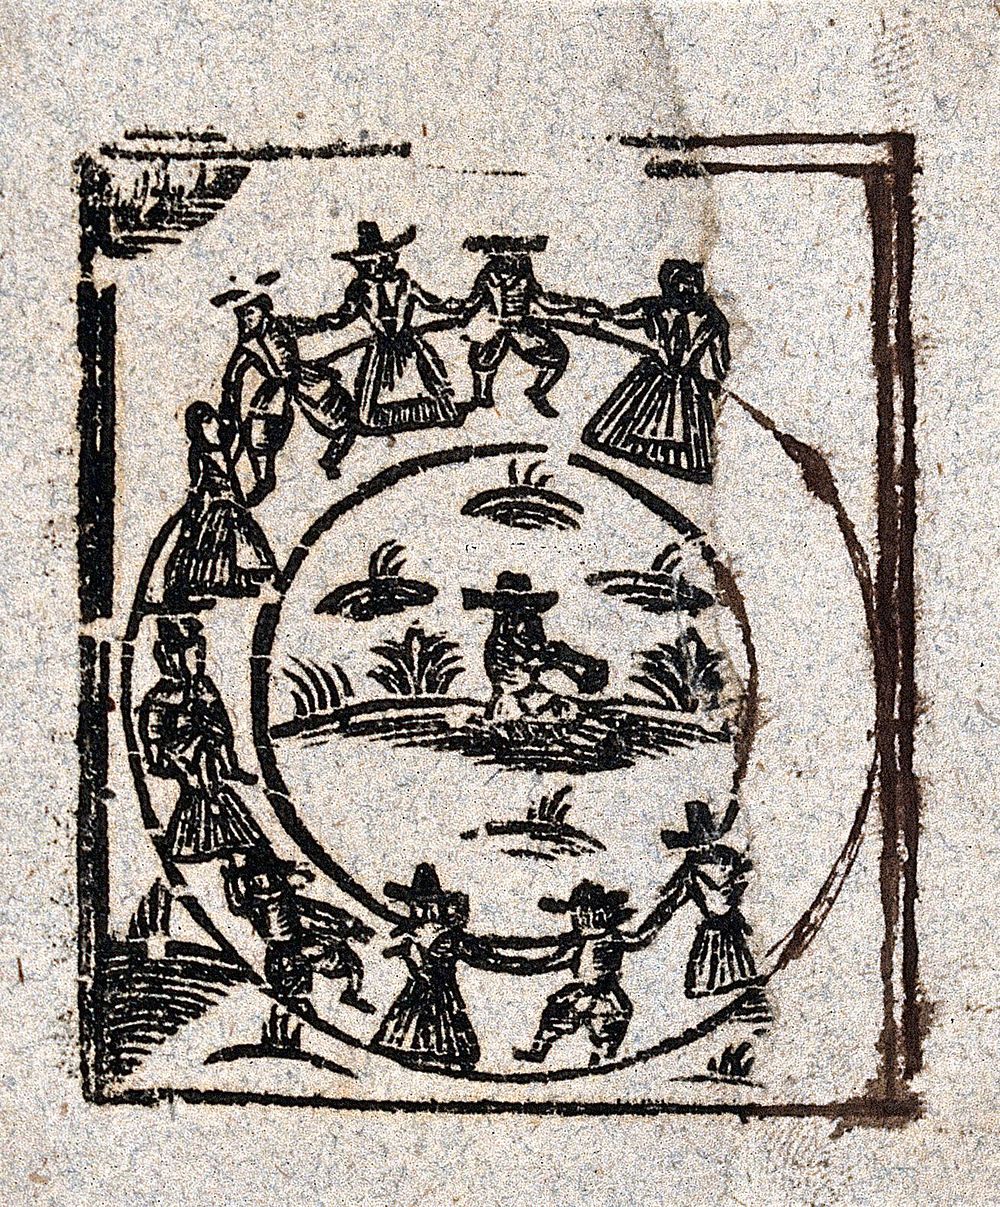 A circle of witches dance around a central figure. Woodcut, ca. 1700-1720.